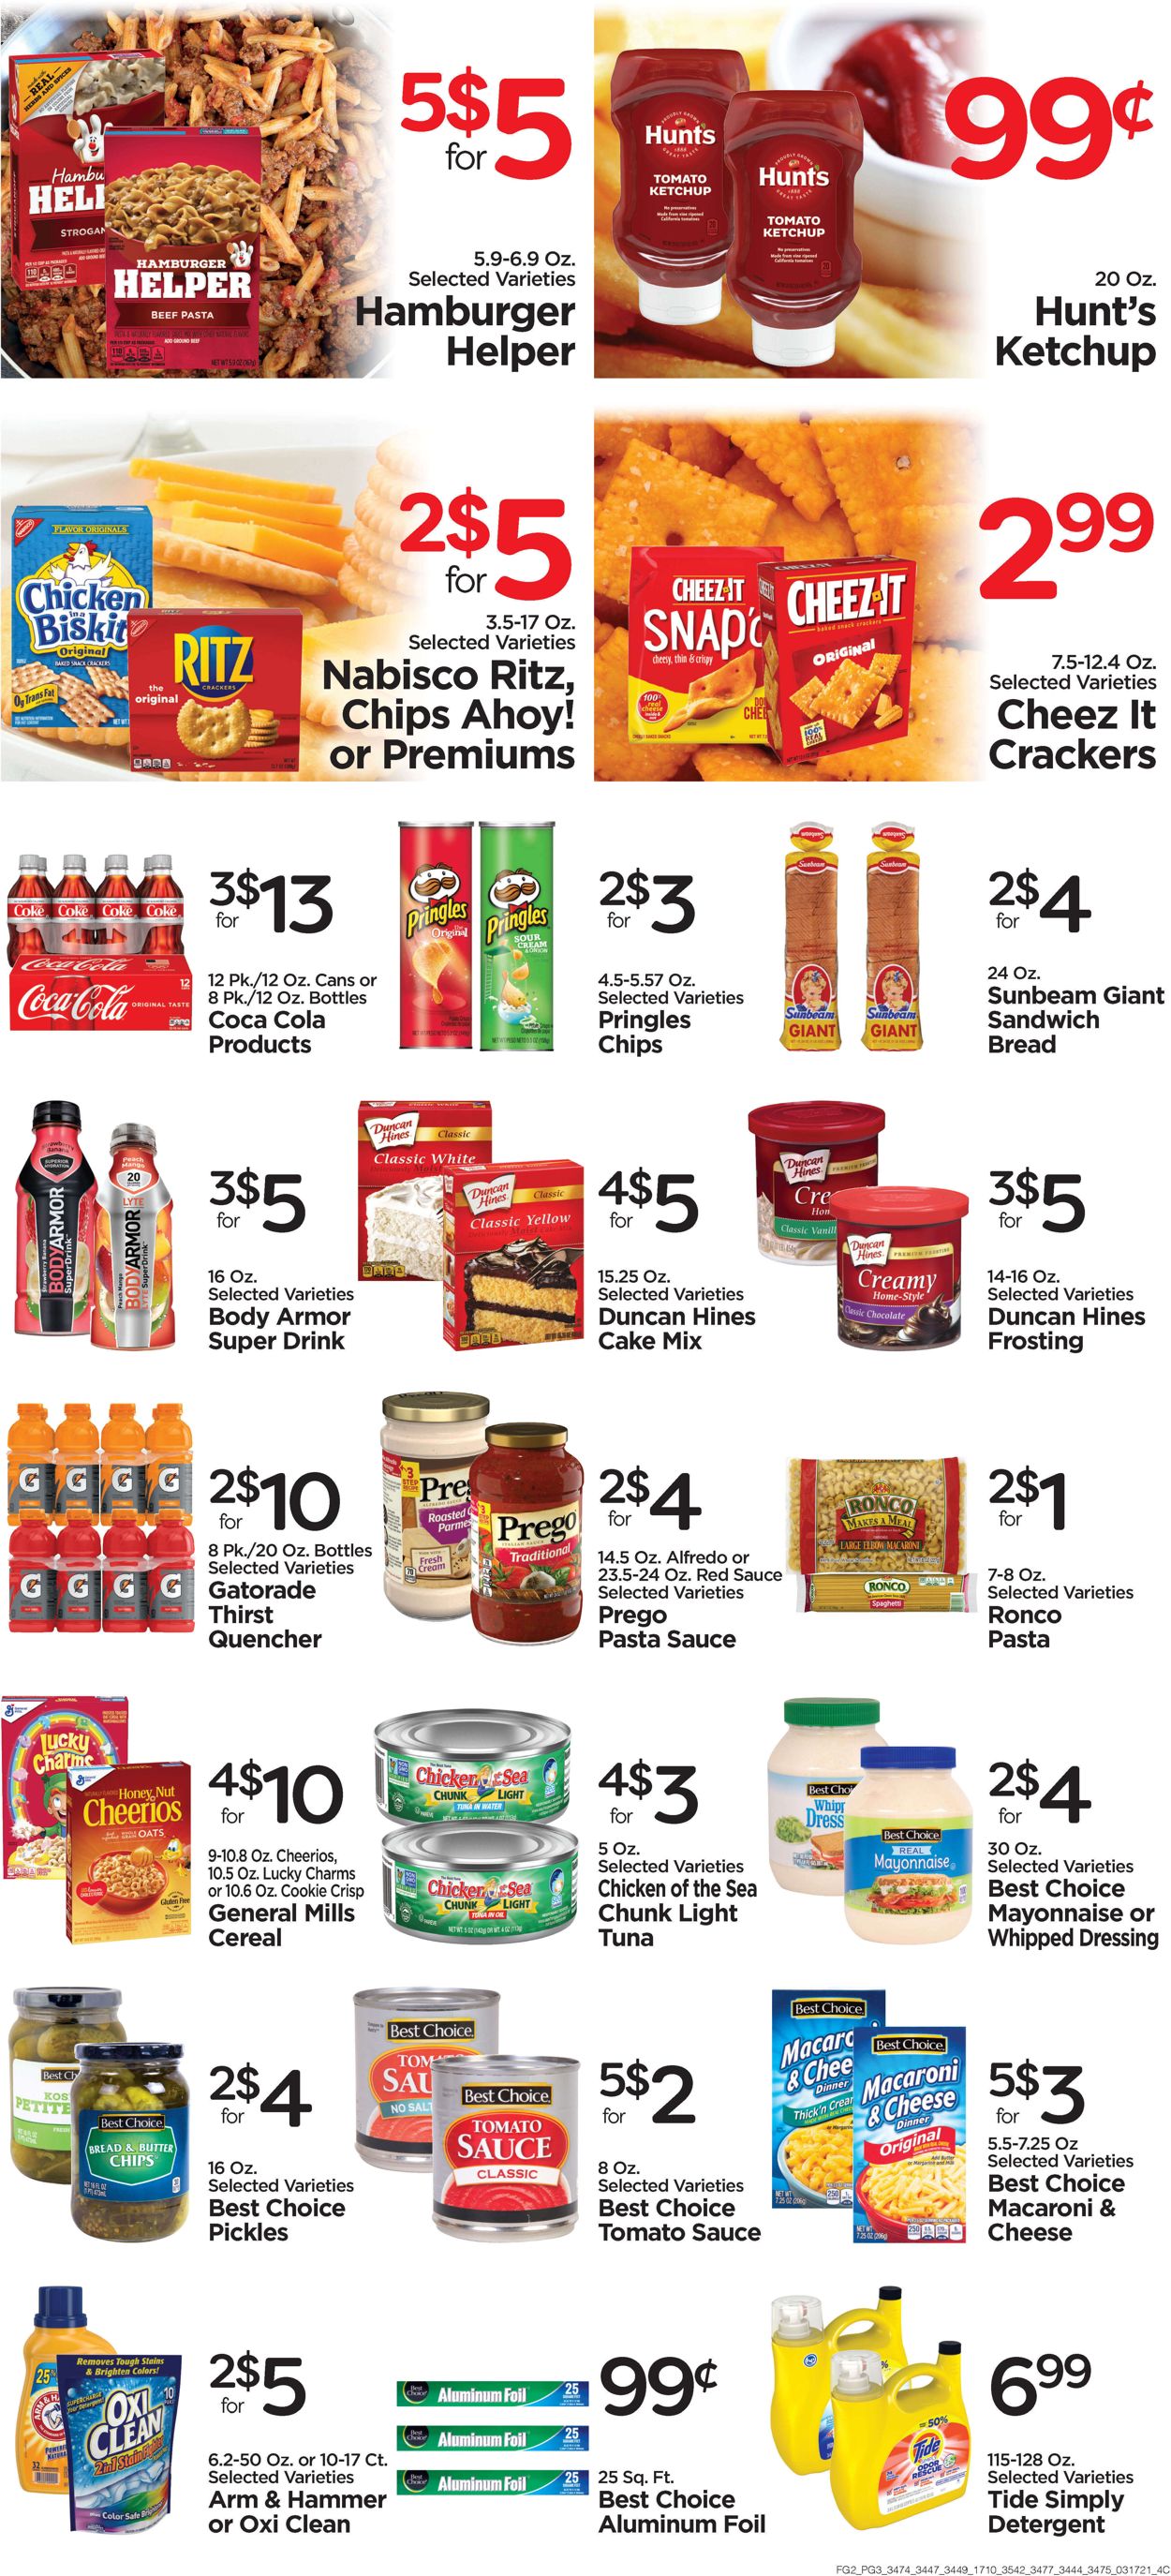 Catalogue Edwards Food Giant from 03/17/2021